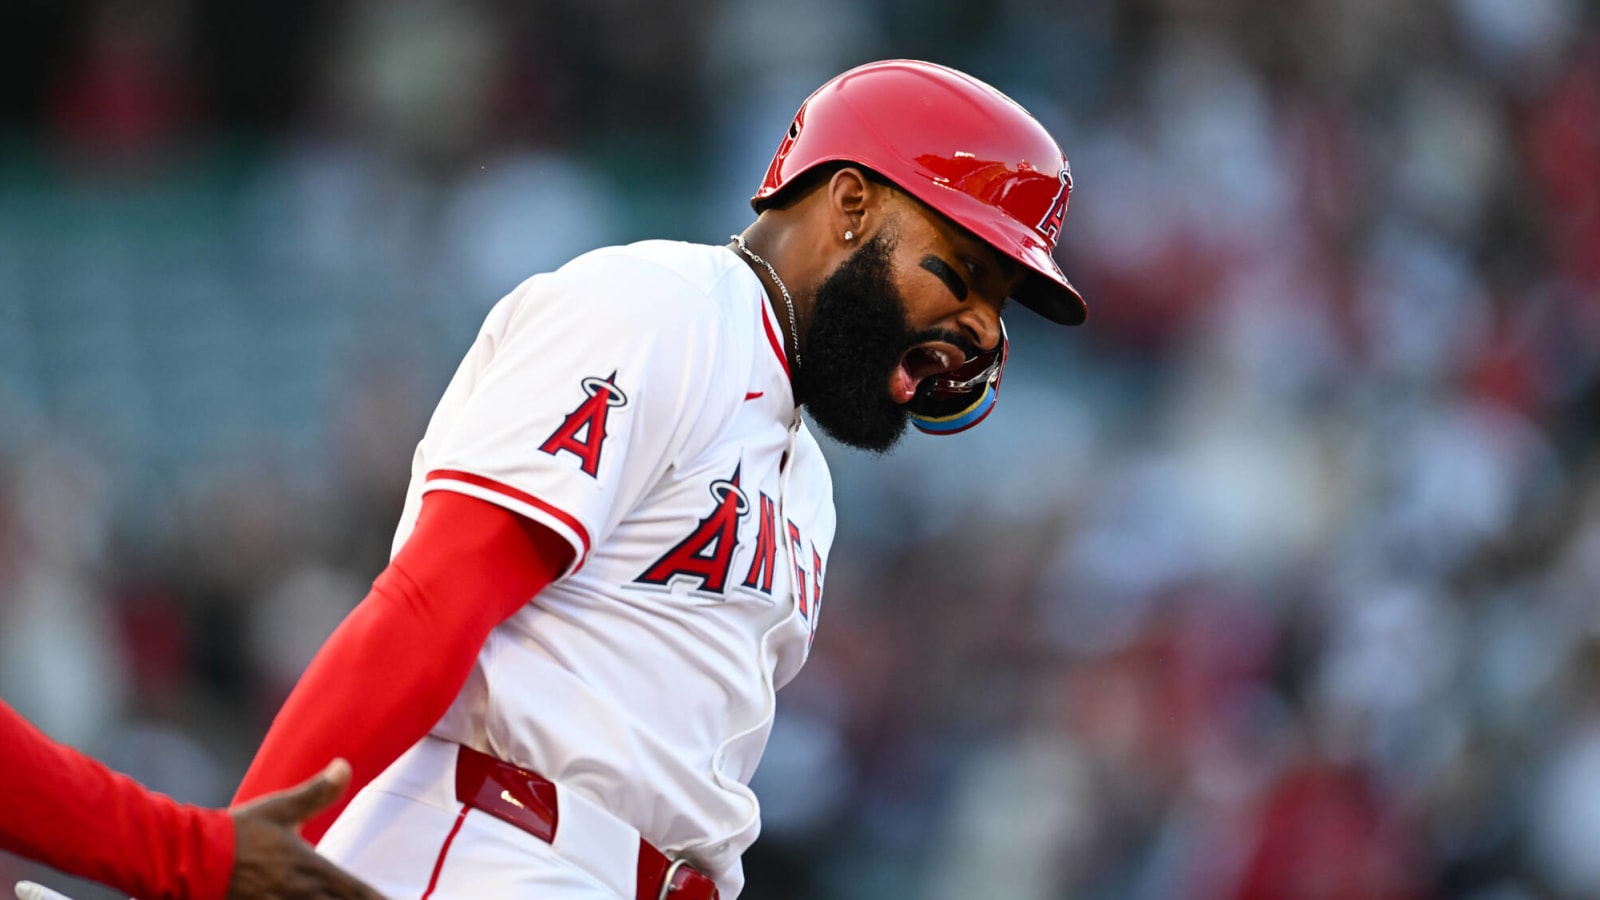 Jo Adell on His Hot Start for the Angels and What Has Changed